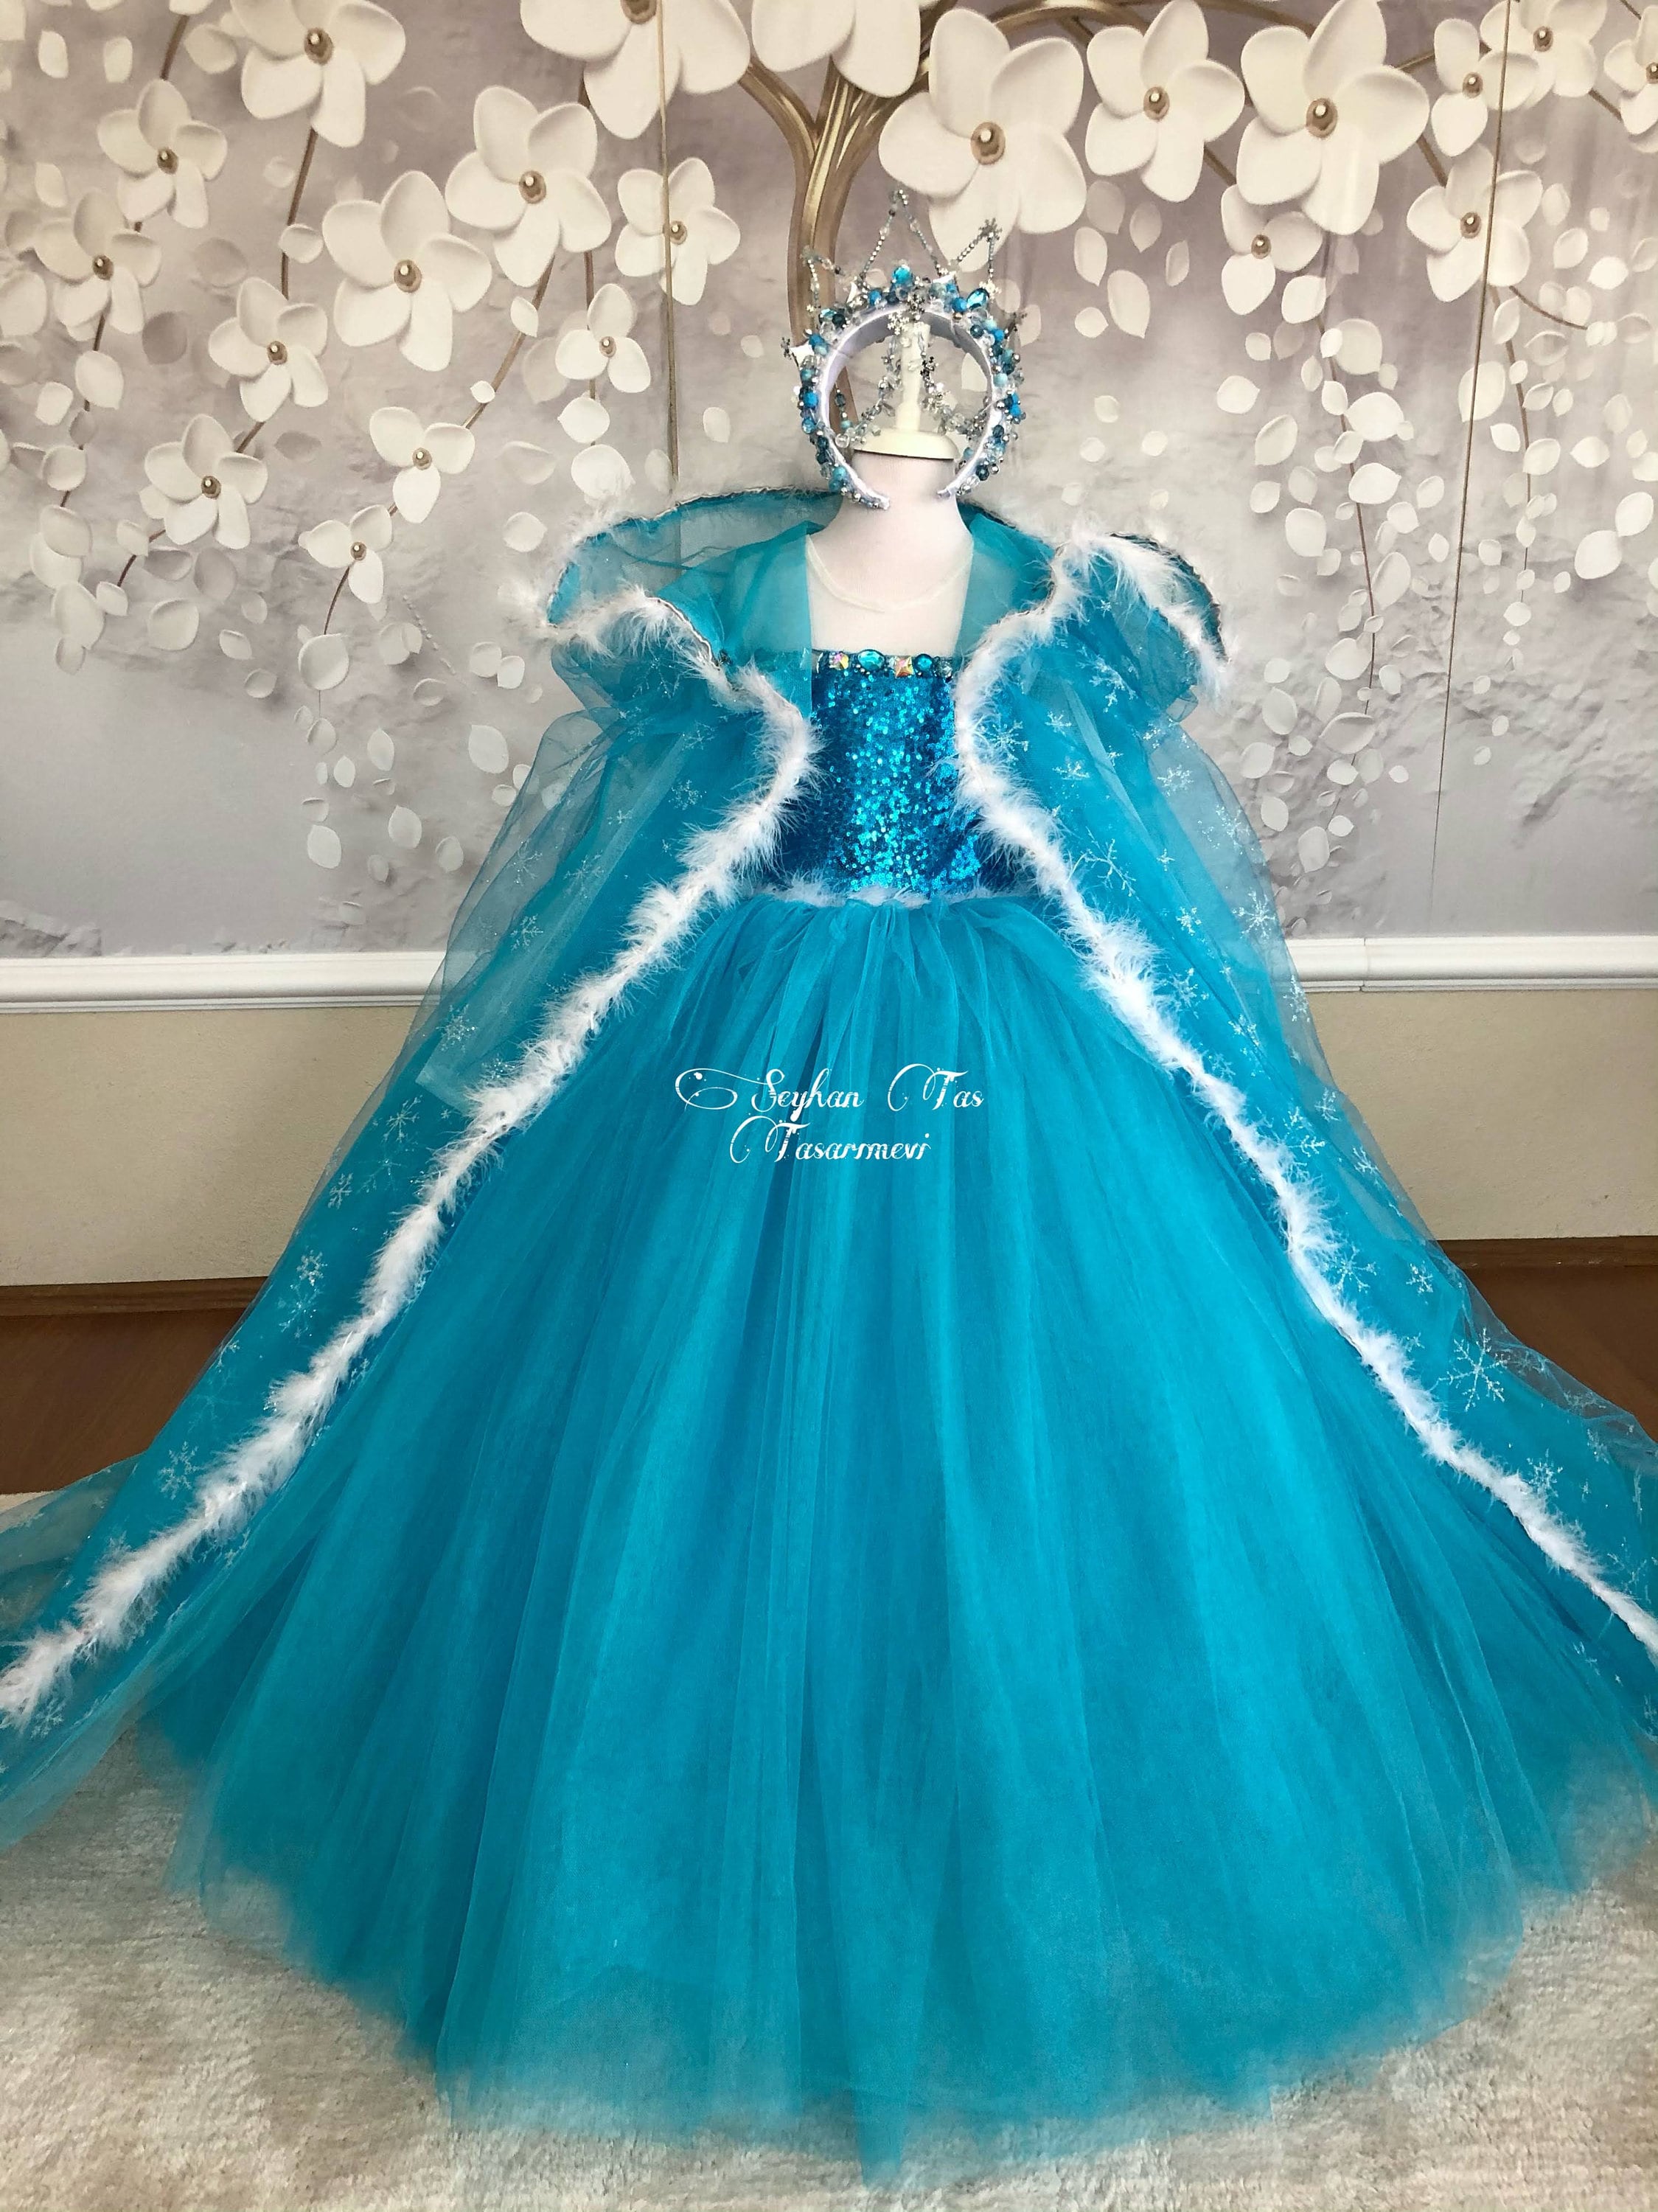 Frosted Heights/Frozen inspired dress! : r/DreamlightValley